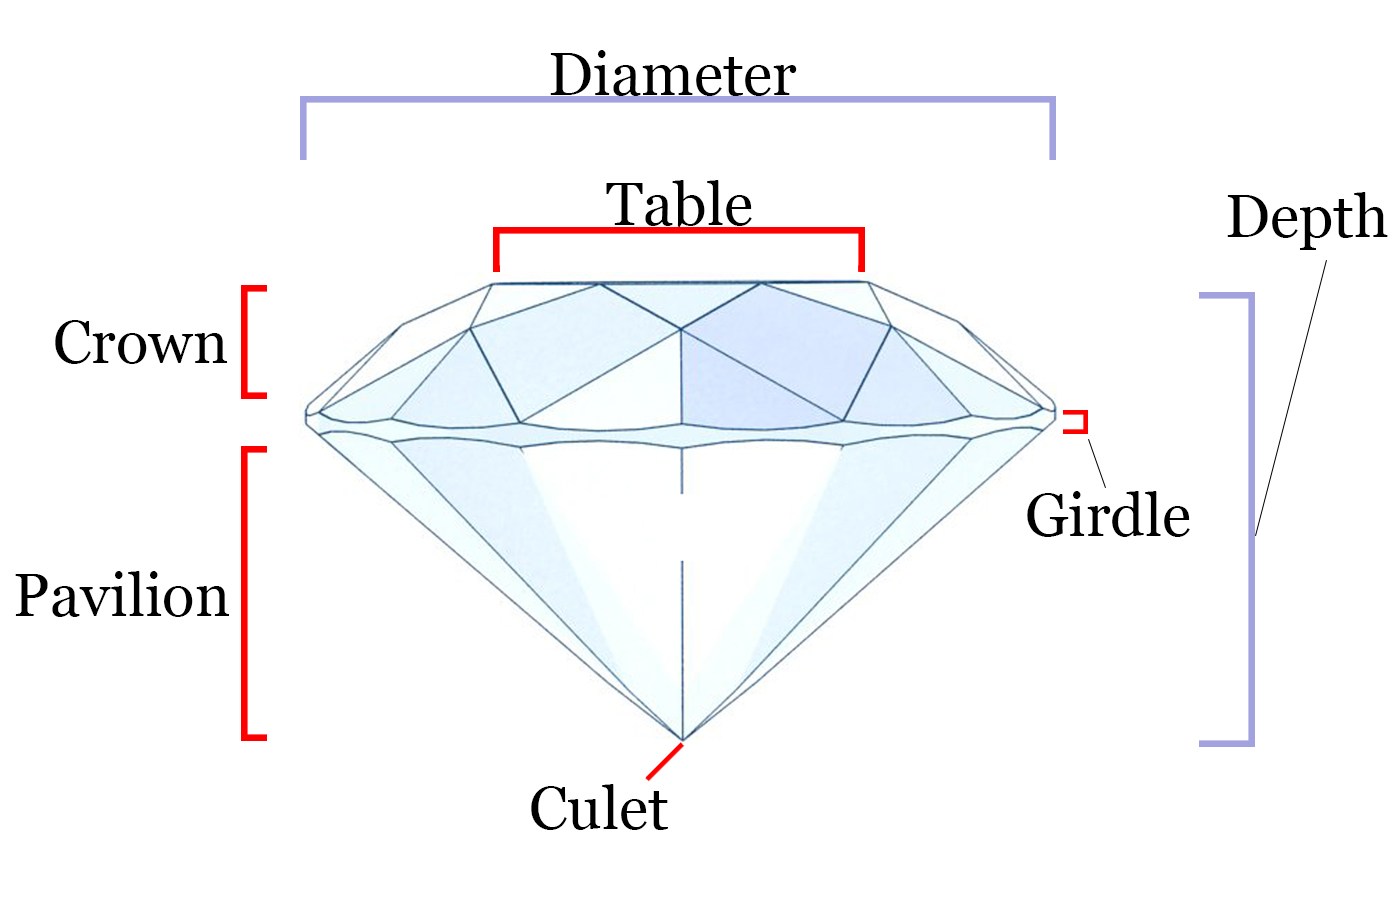 Buying a diamond? Get a fix on the four Cs before you pick up a